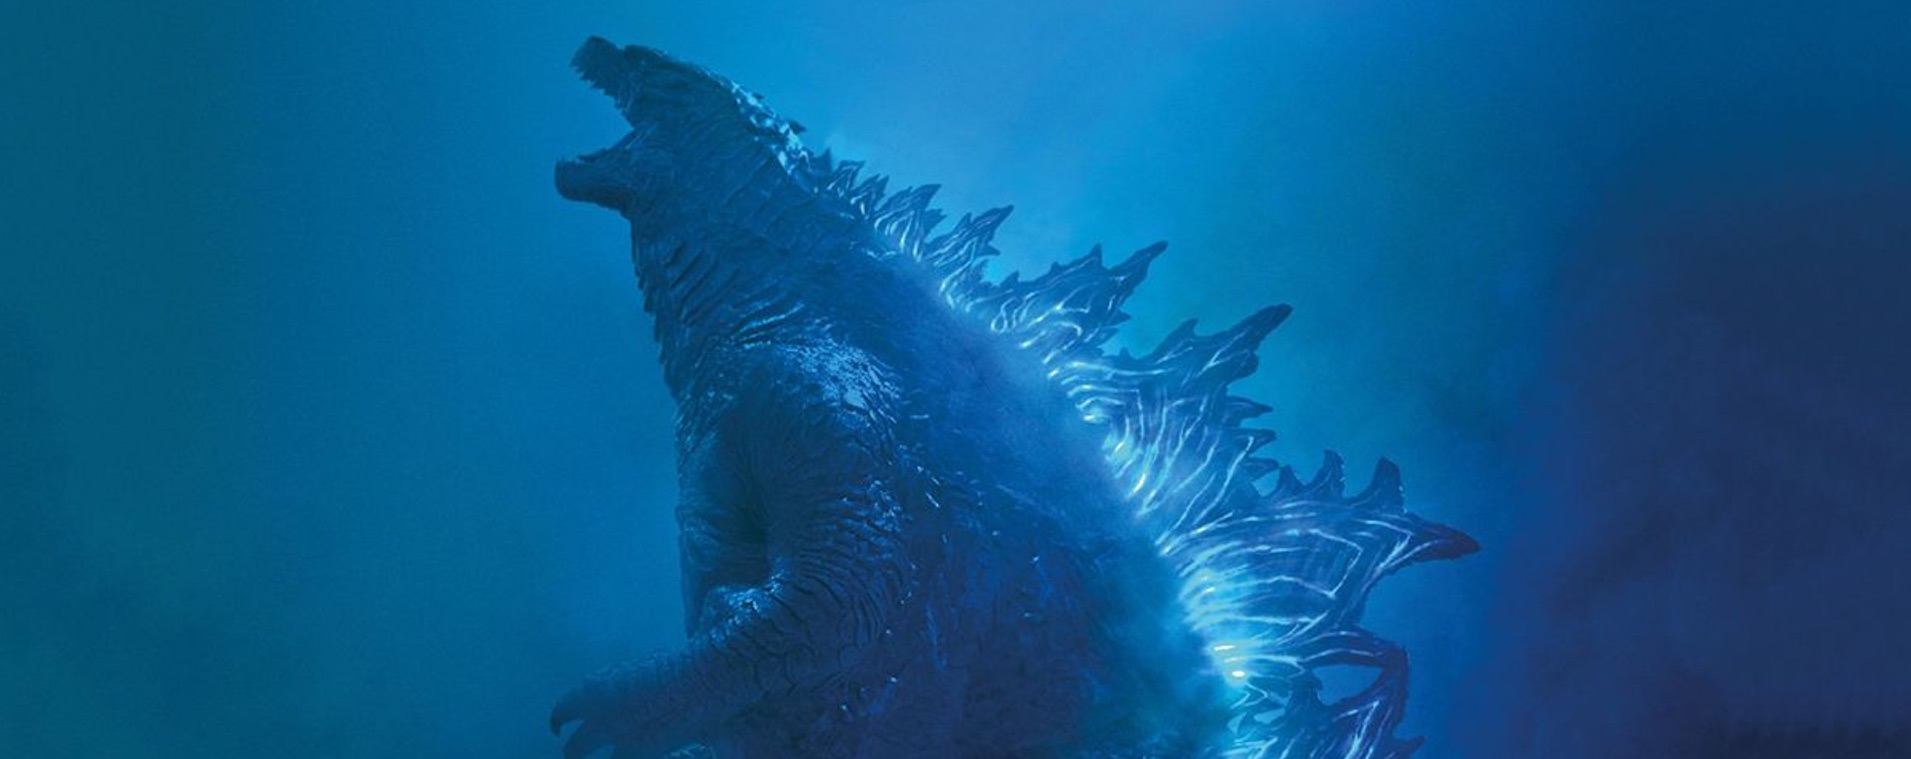 10 Movies You Must Watch Before You See Godzilla: King of the Monsters